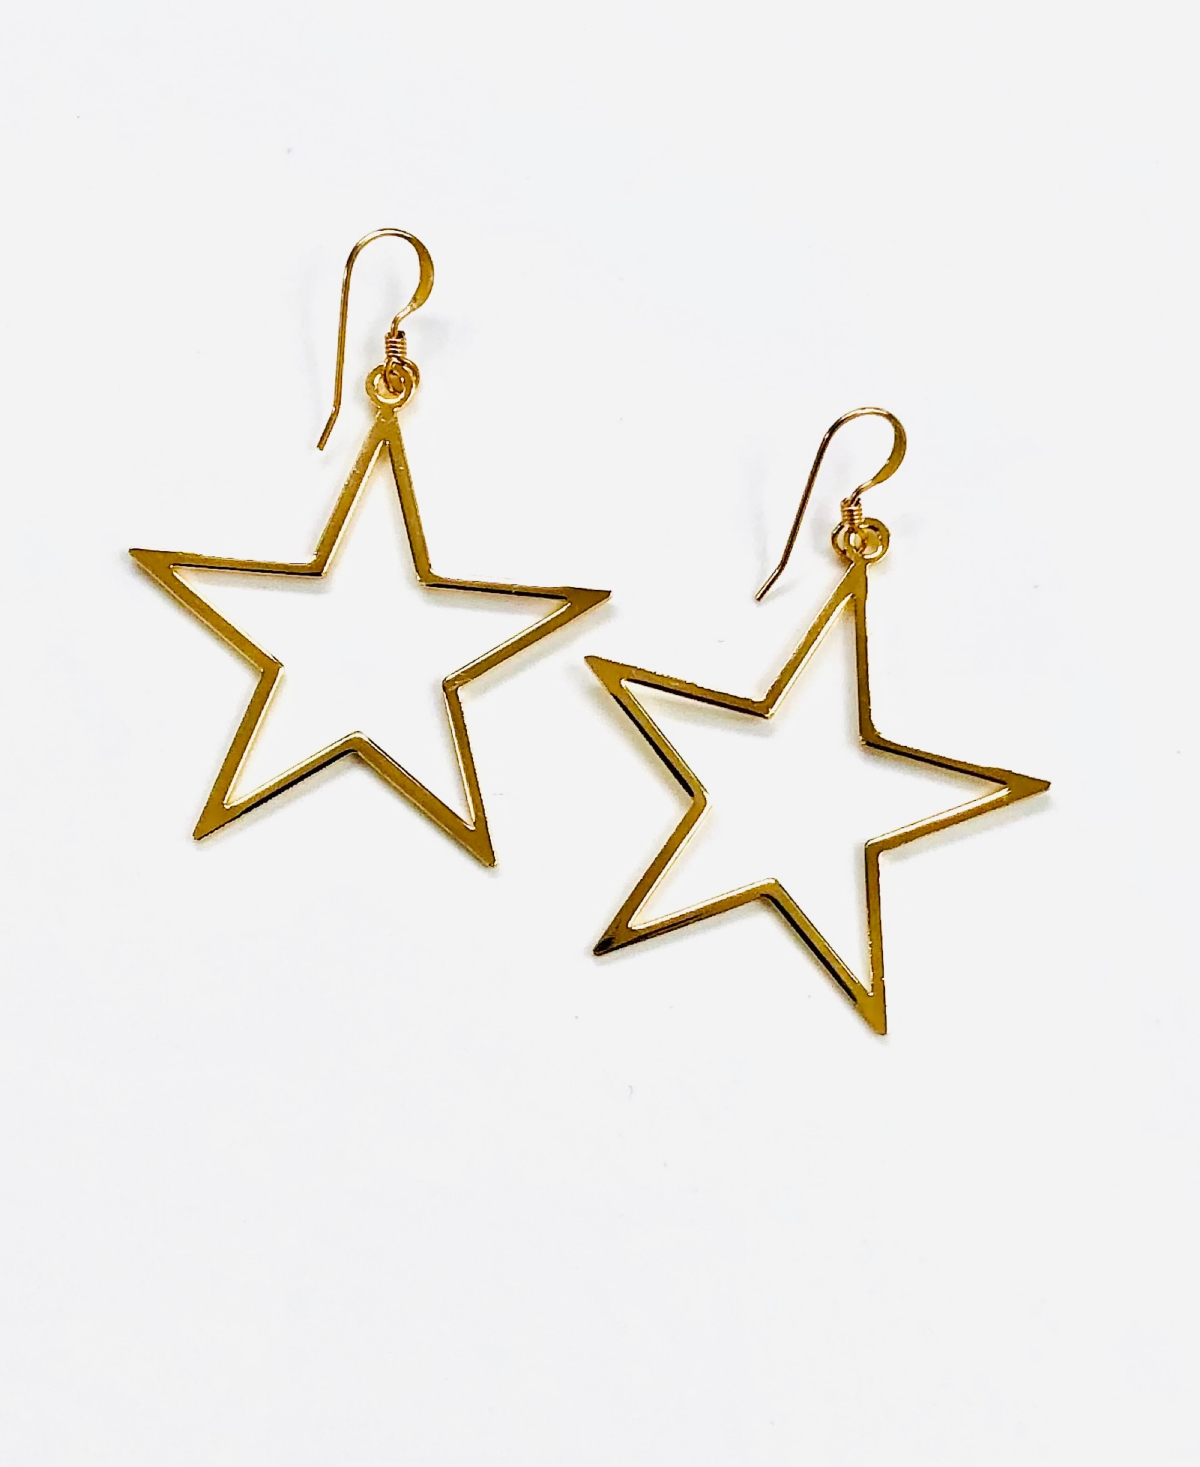 Women's Large Star Earrings with 14K Gold Fill Earwires - Gold